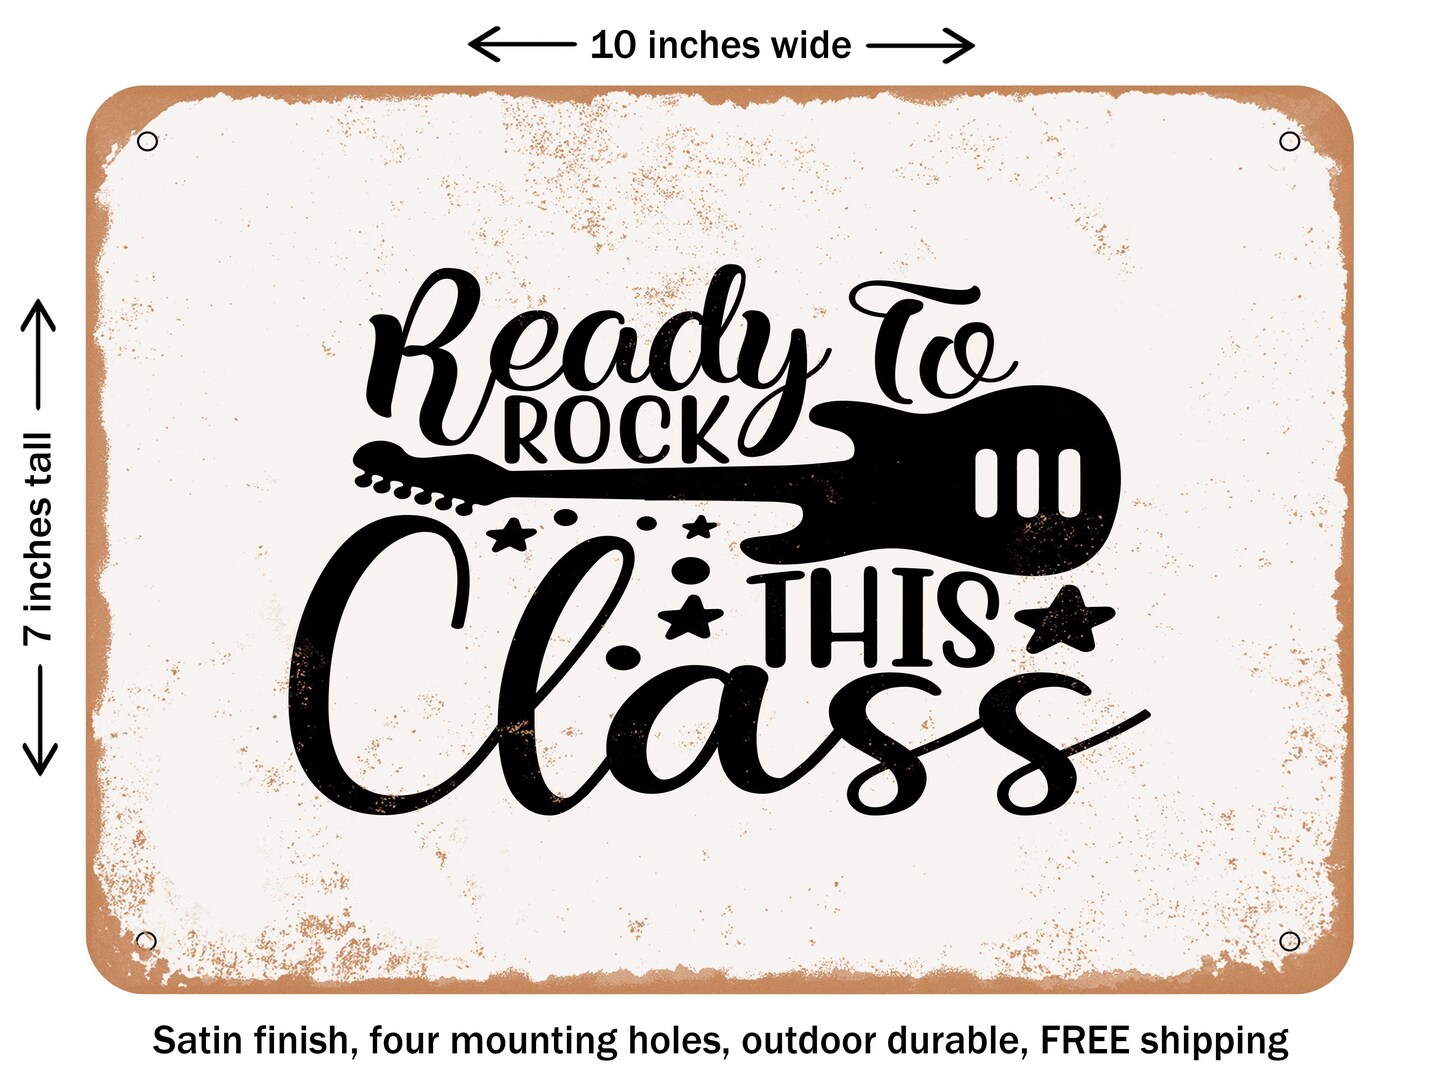 DECORATIVE METAL SIGN - Ready Rock This Class - Vintage Rusty Look